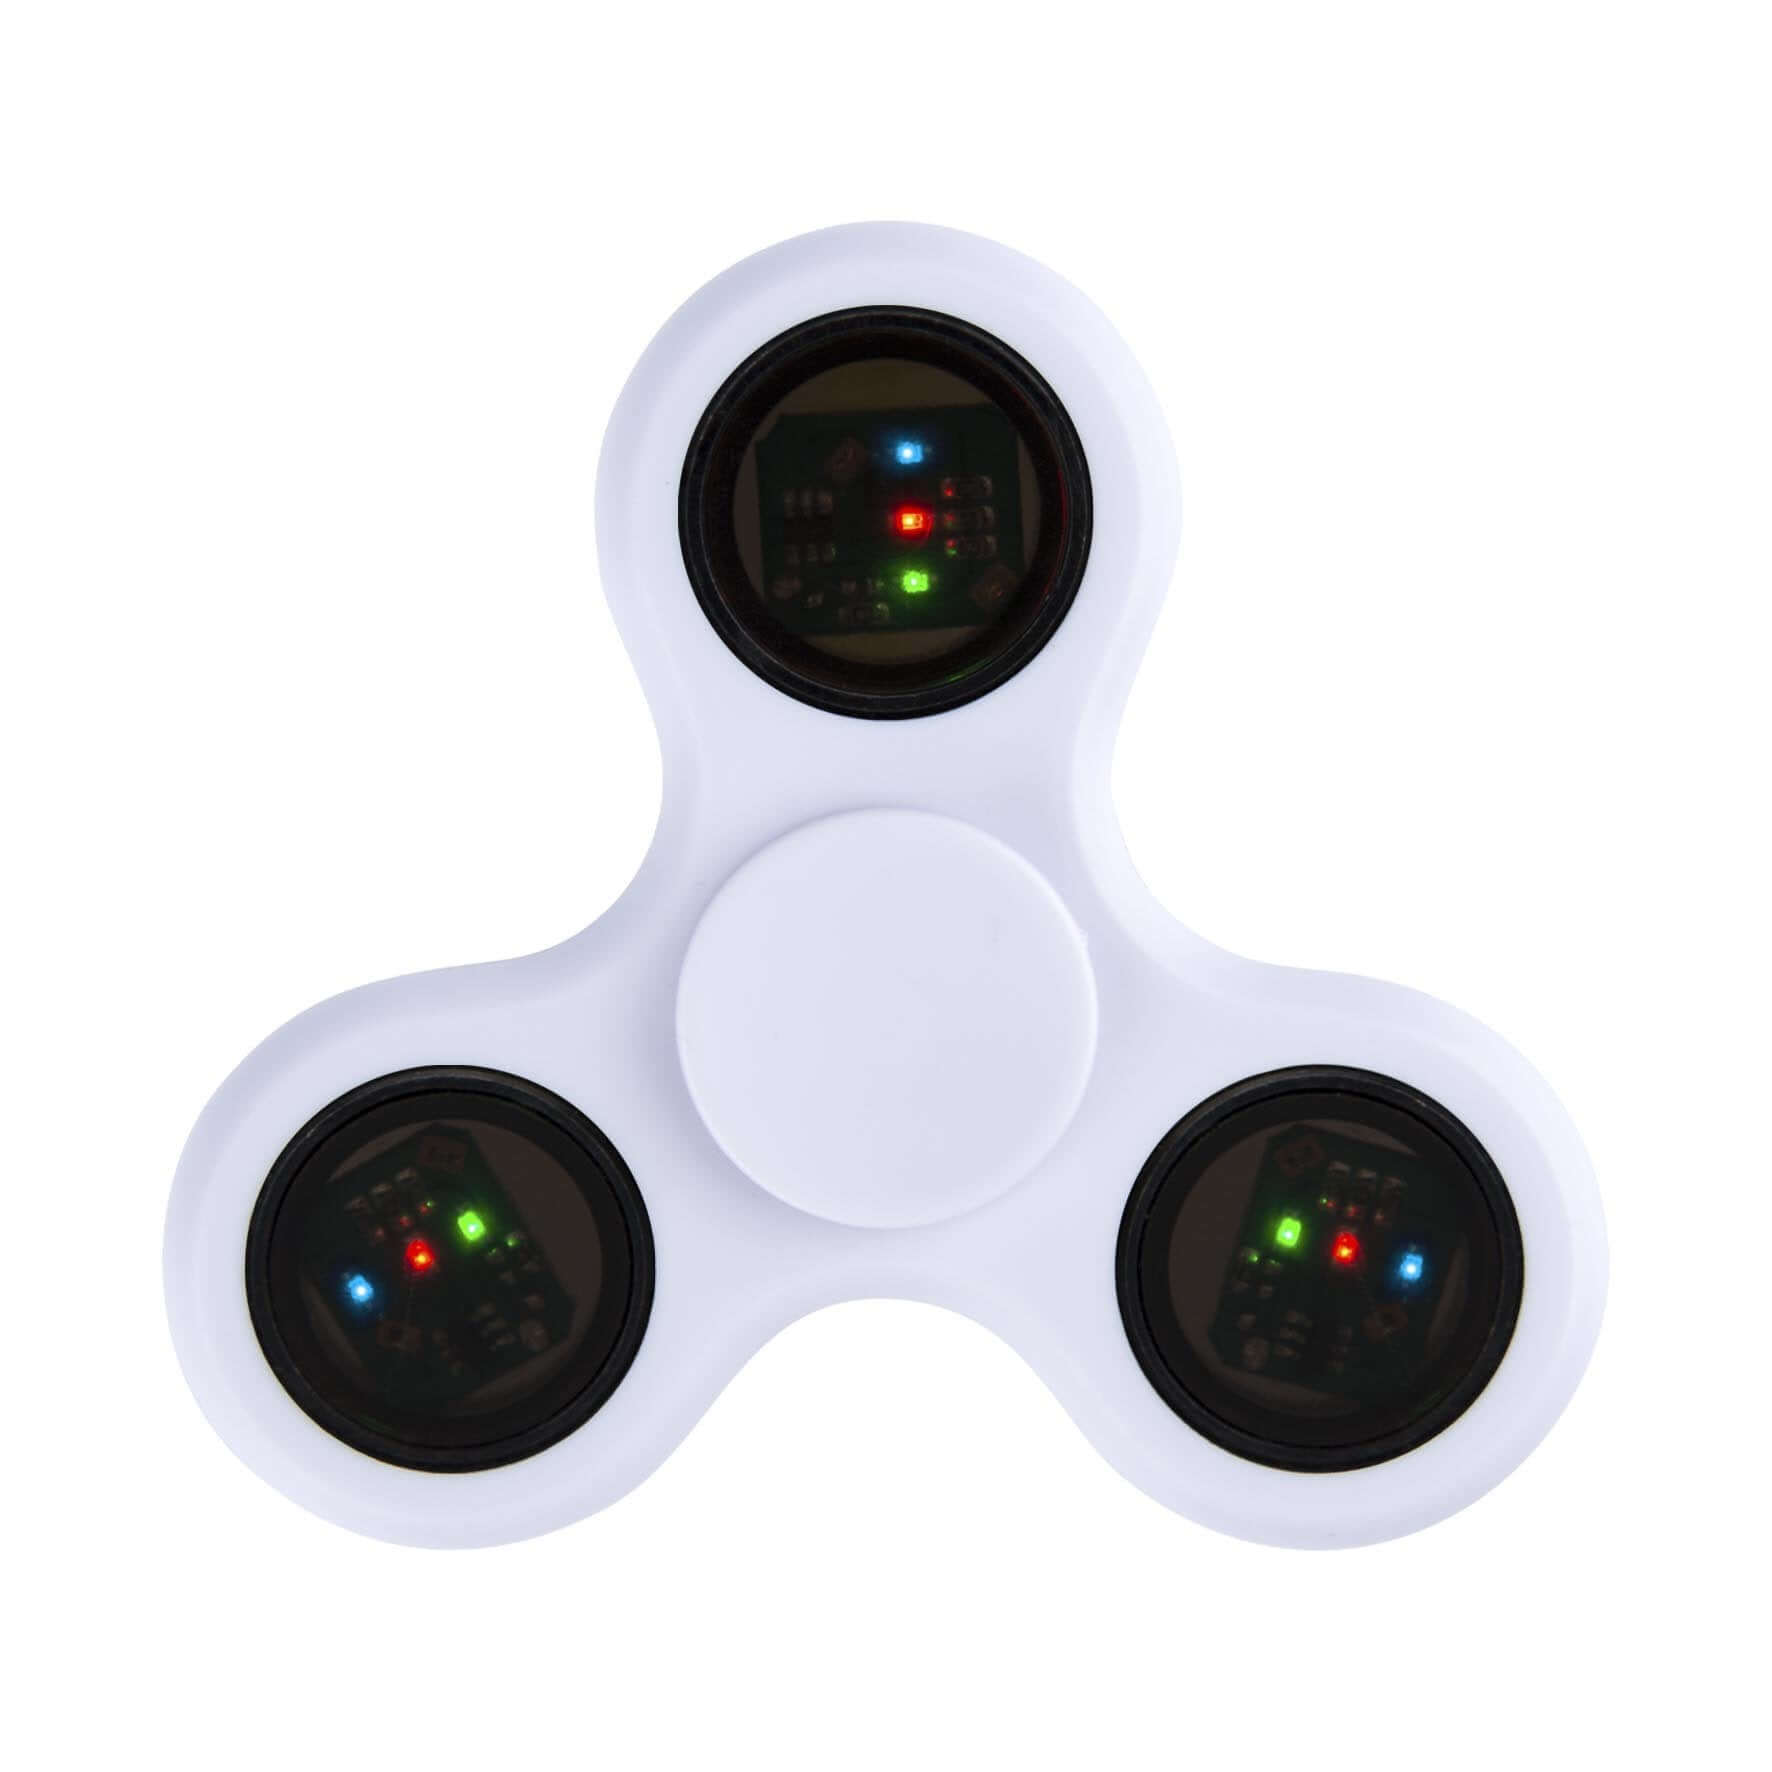 Get Light-Up Fidget Spinners (LED) at Fidget Cube Antsy Labs